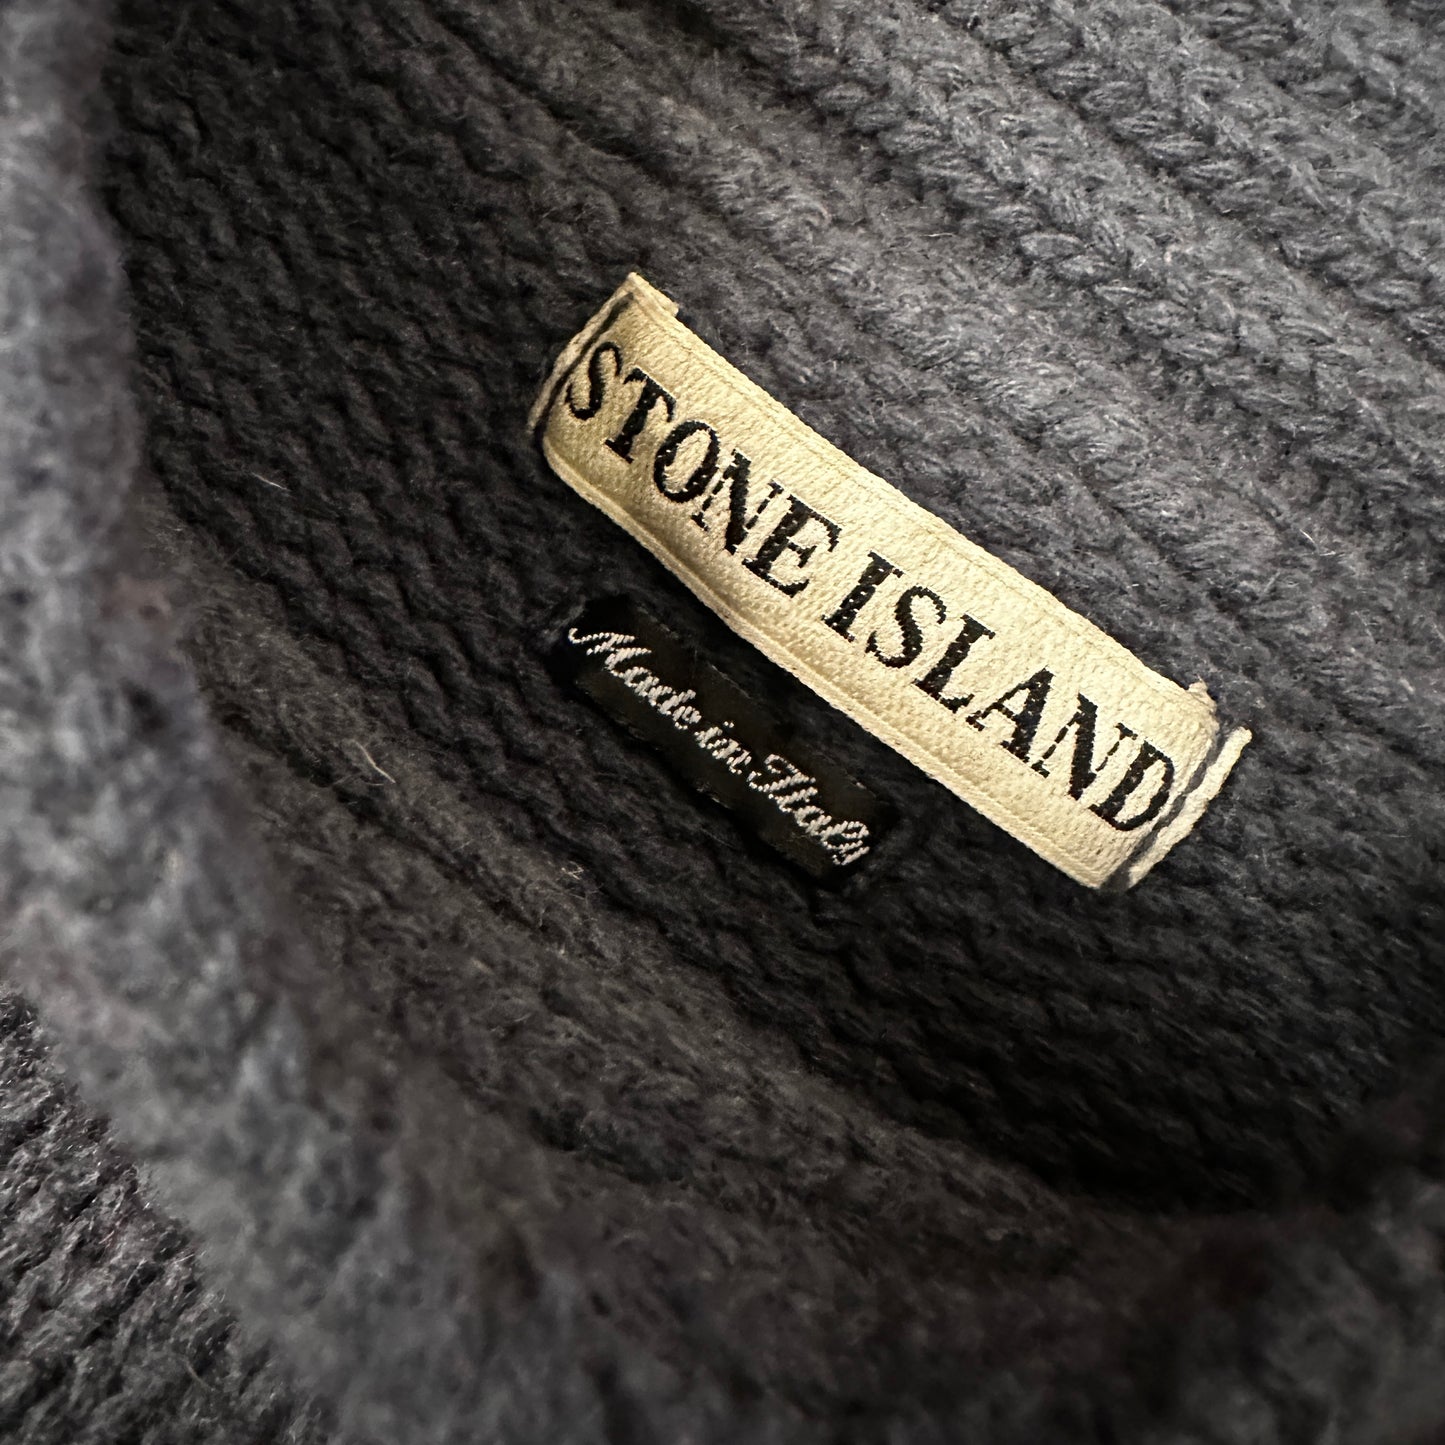 Stone Island Vintage 1998 Charcoal Turtleneck Wool Knit Sweater - L - Made in Italy